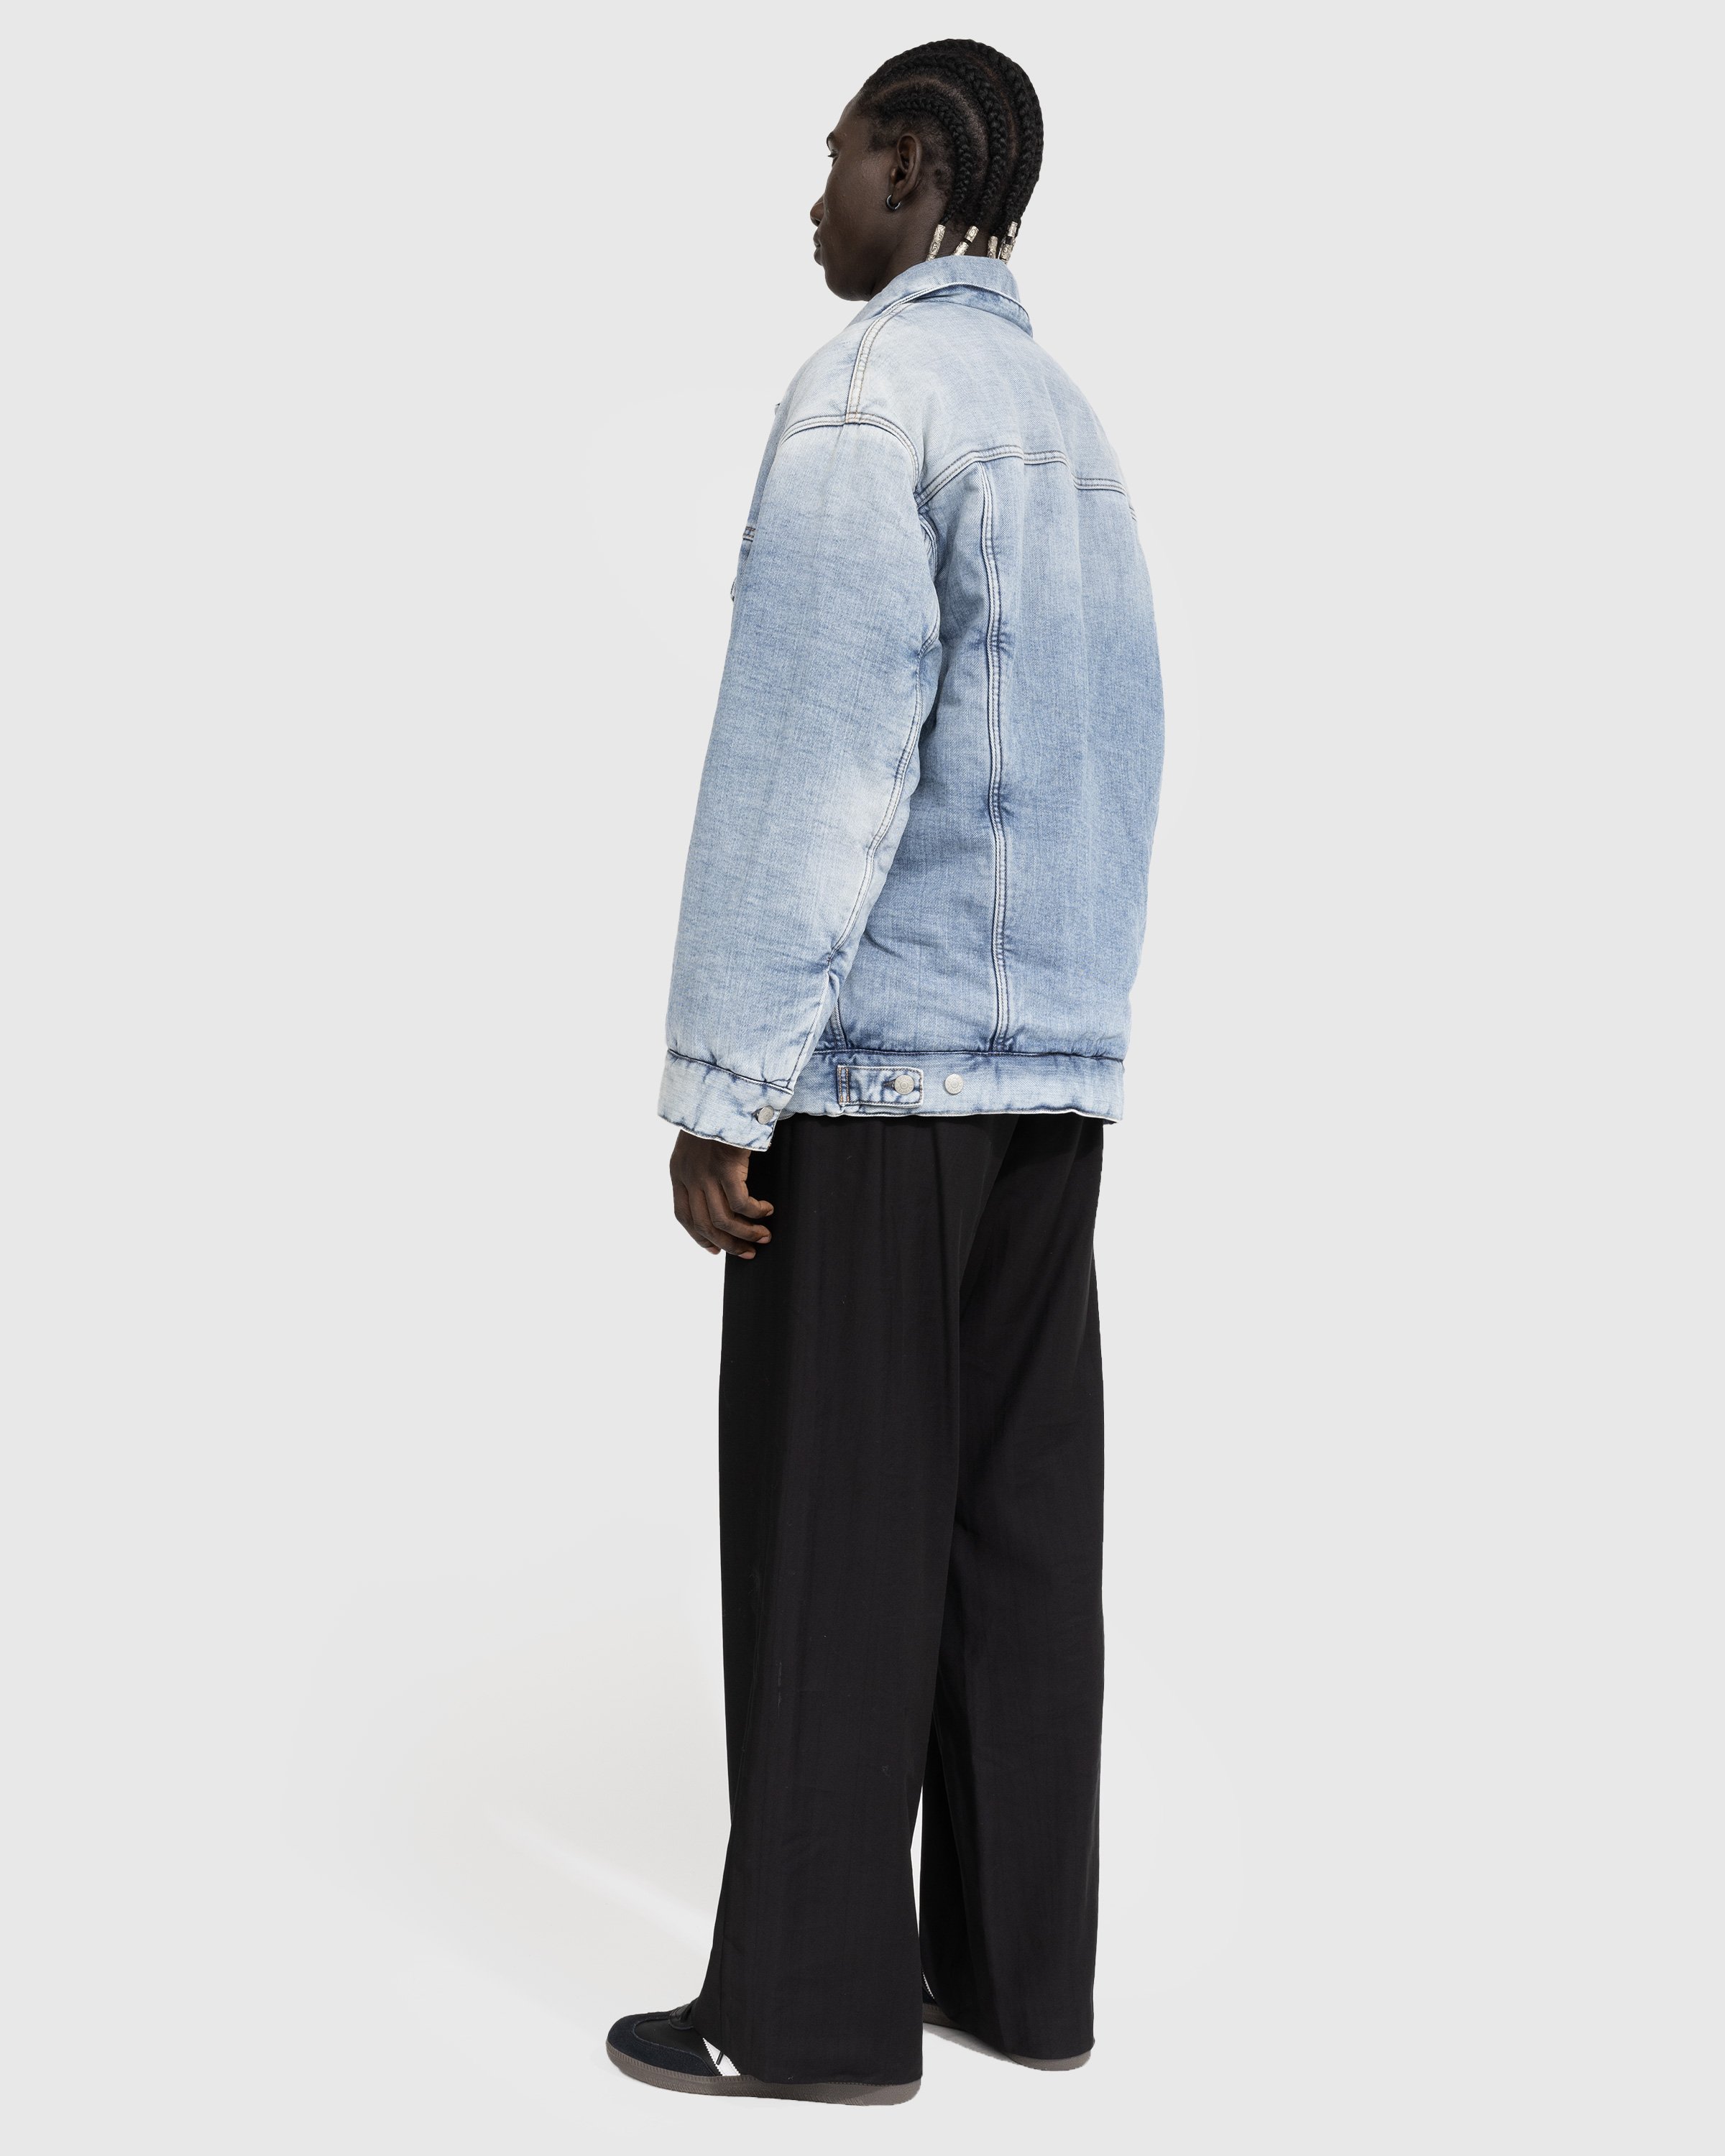 Acne Studios - FN-UX-OUTW000025 - Clothing - Blue - Image 4